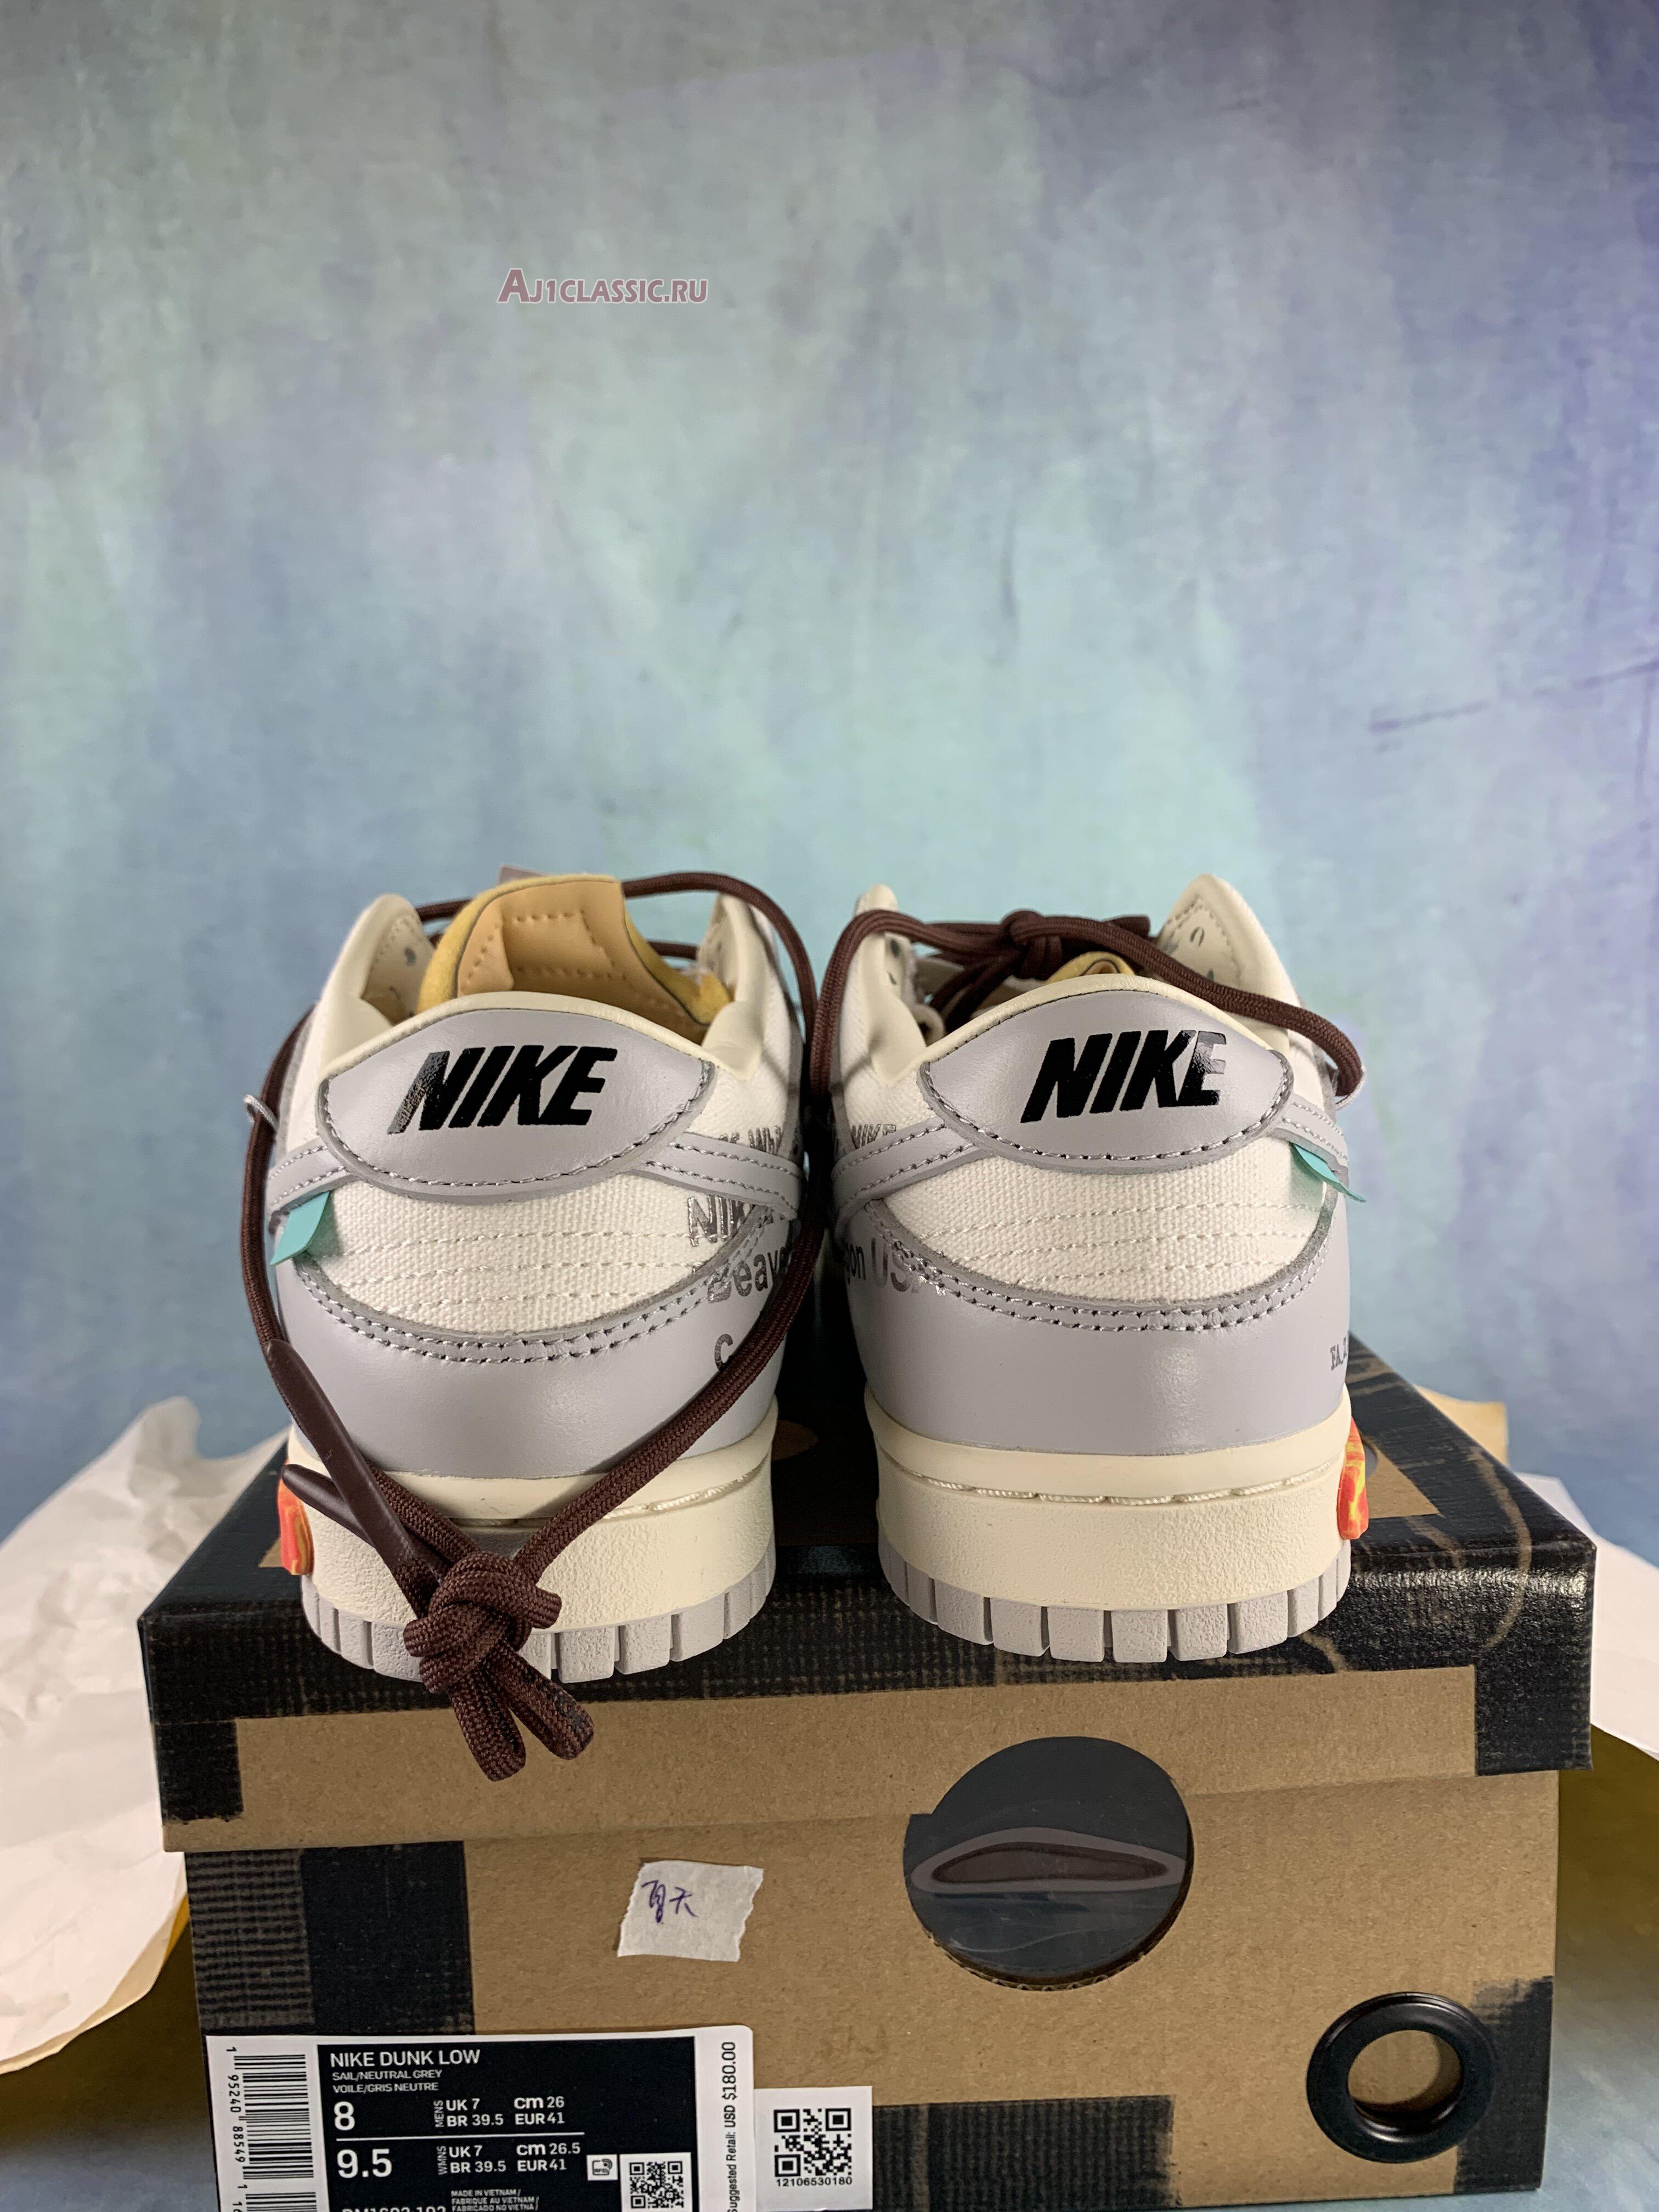 Off-White x Nike Dunk Low "Lot 46 of 50" DM1602-102